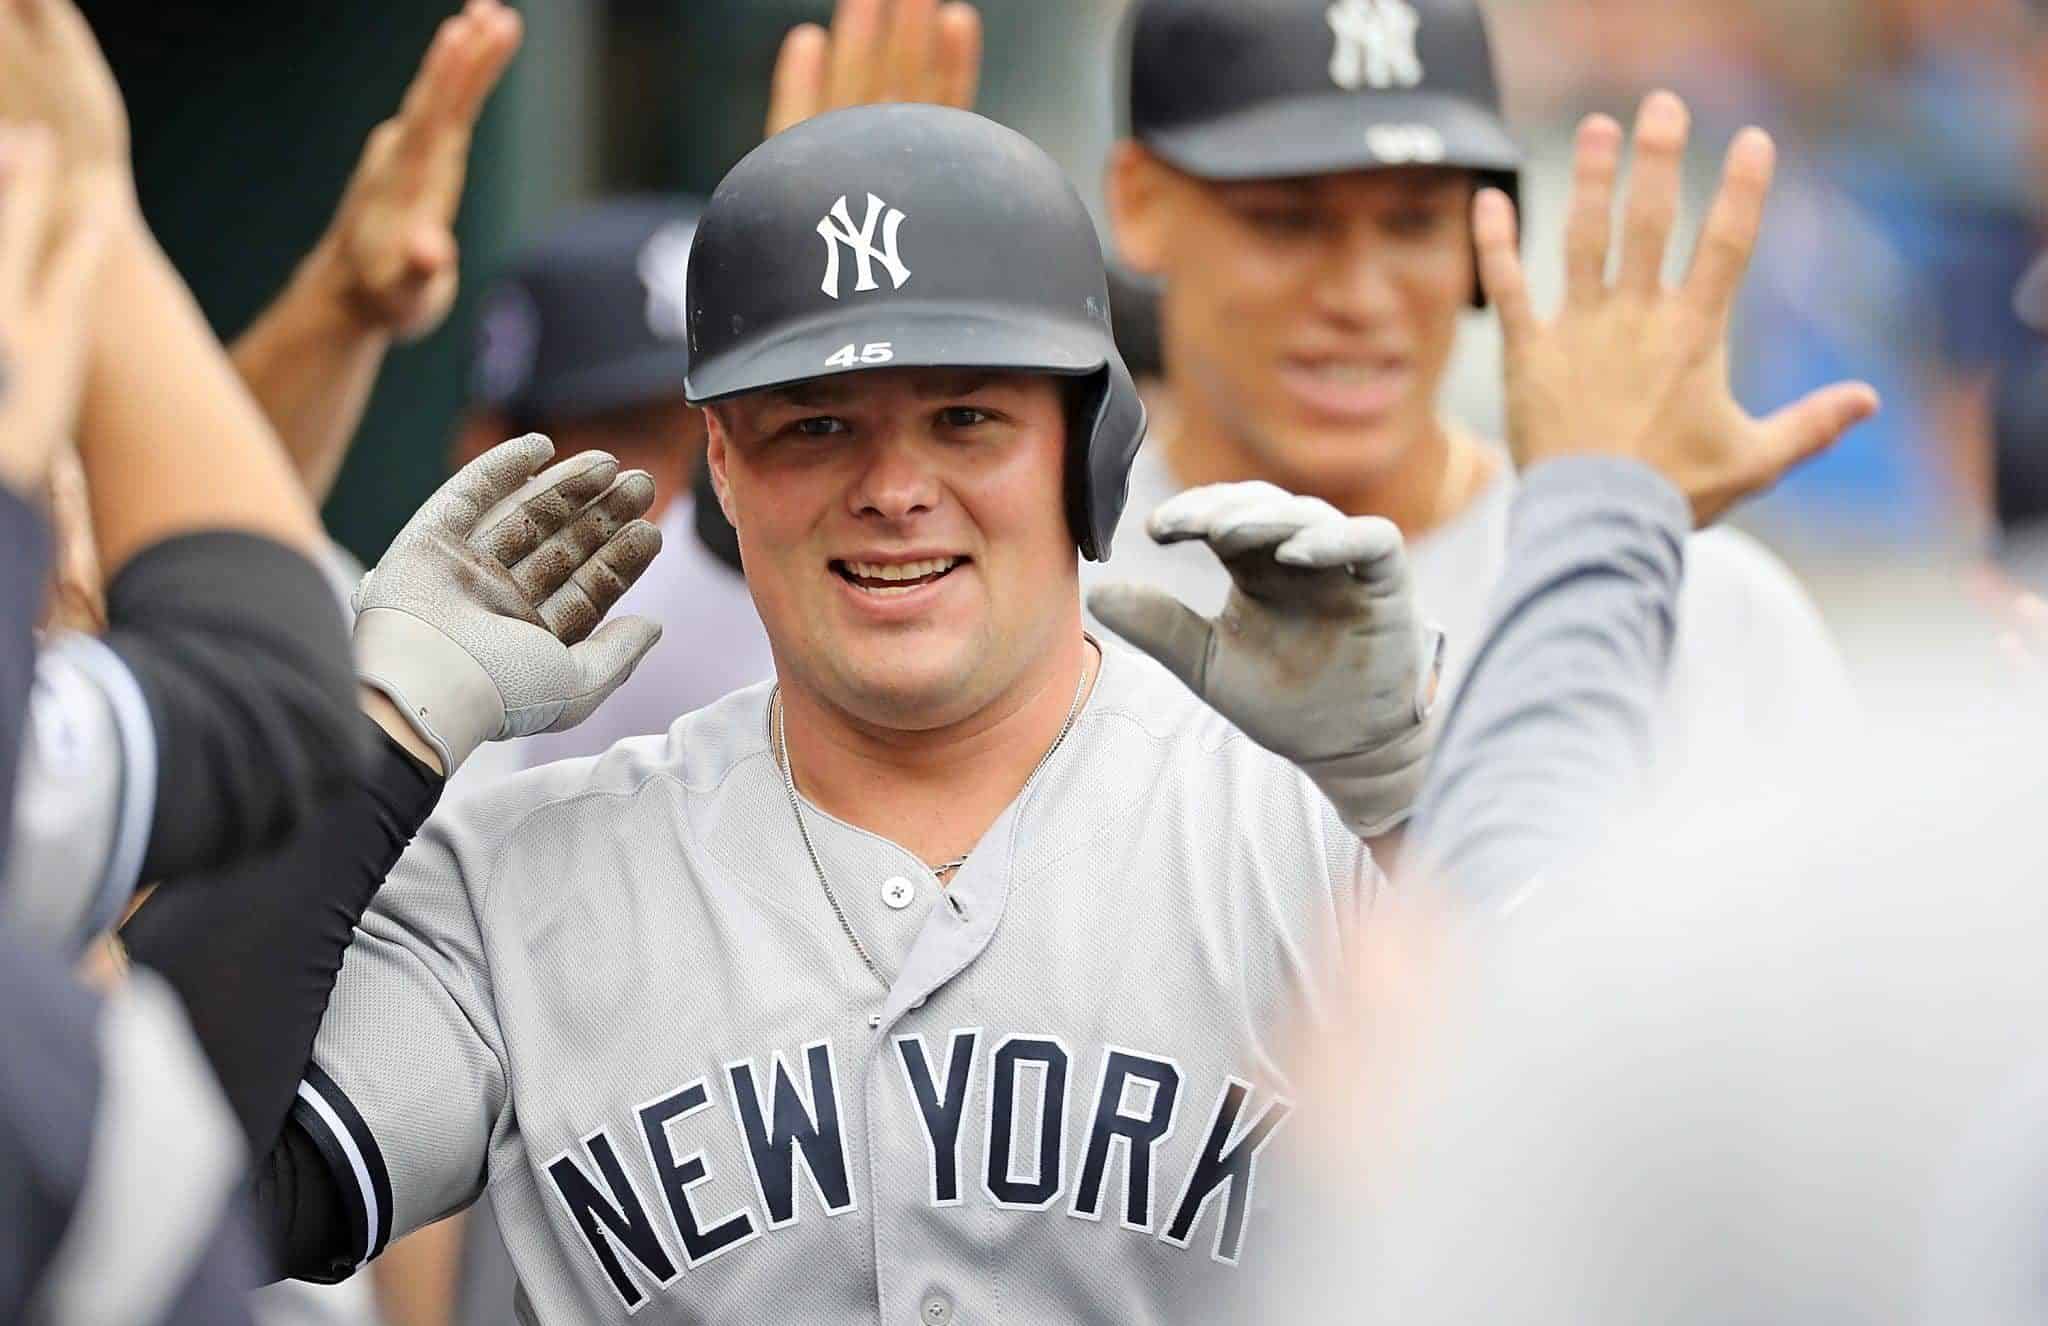 DETROIT, MI - SEPTEMBER 12: Luke Voit #45 of the New York Yankees celebrates in the dugout after hitting a first-inning, two-run home run during game one of a double header against the Detroit Tigers at Comerica Park on September 12, 2019 in Detroit, Michigan.